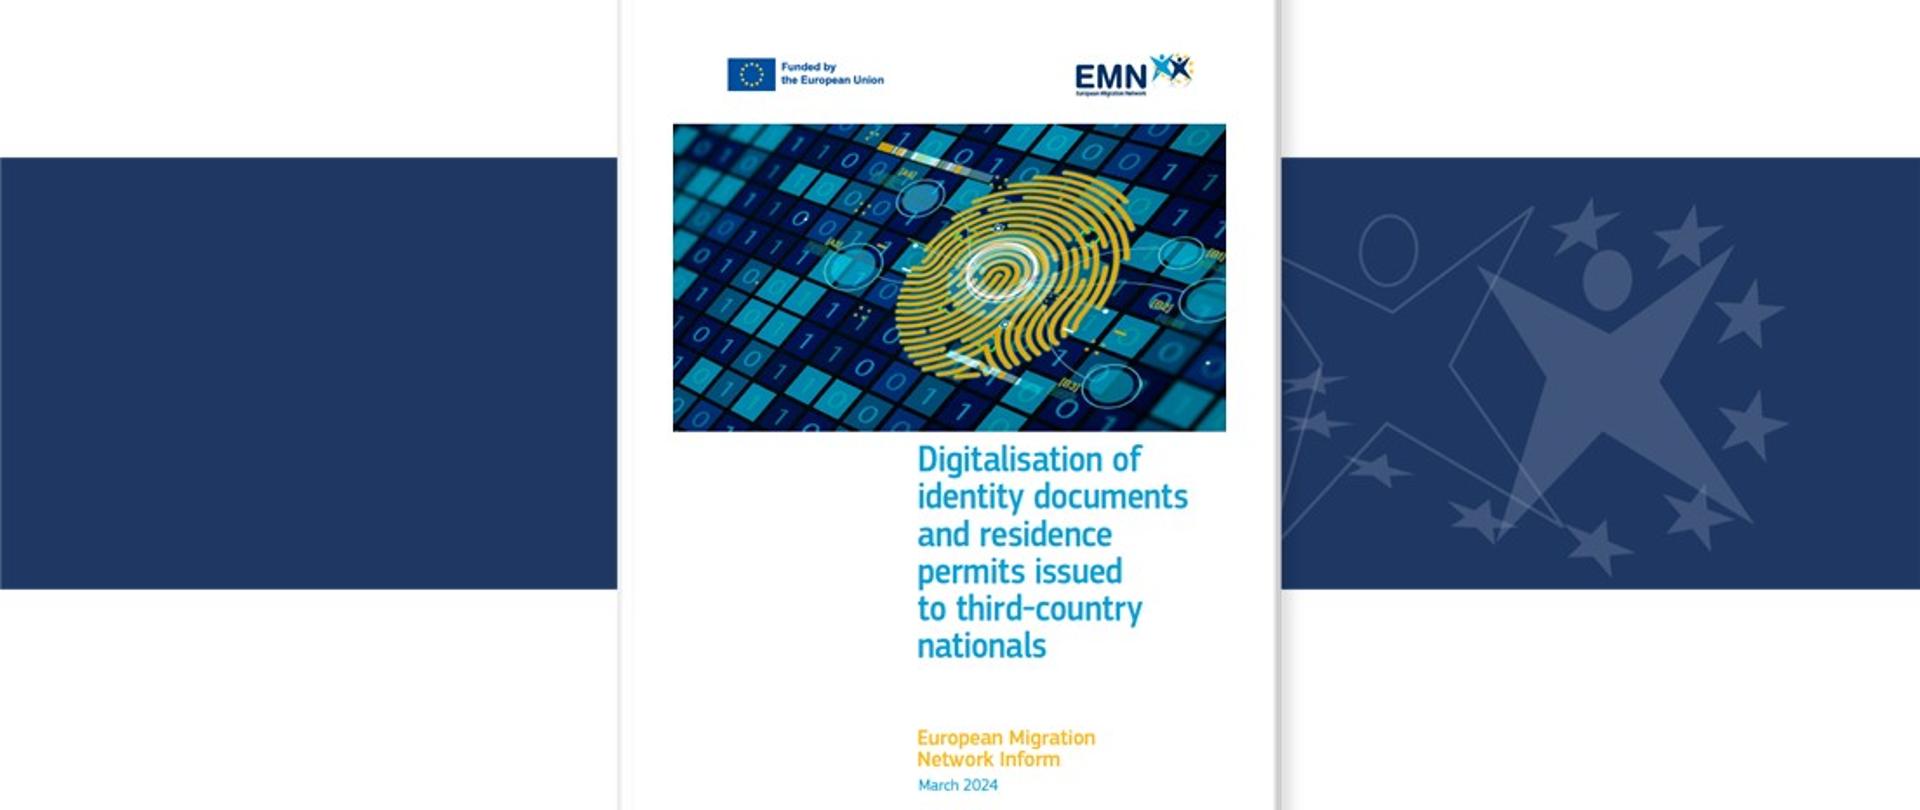 EMN Inform "Digitalisation of identity documents and residence permits issued to third-country nationals"